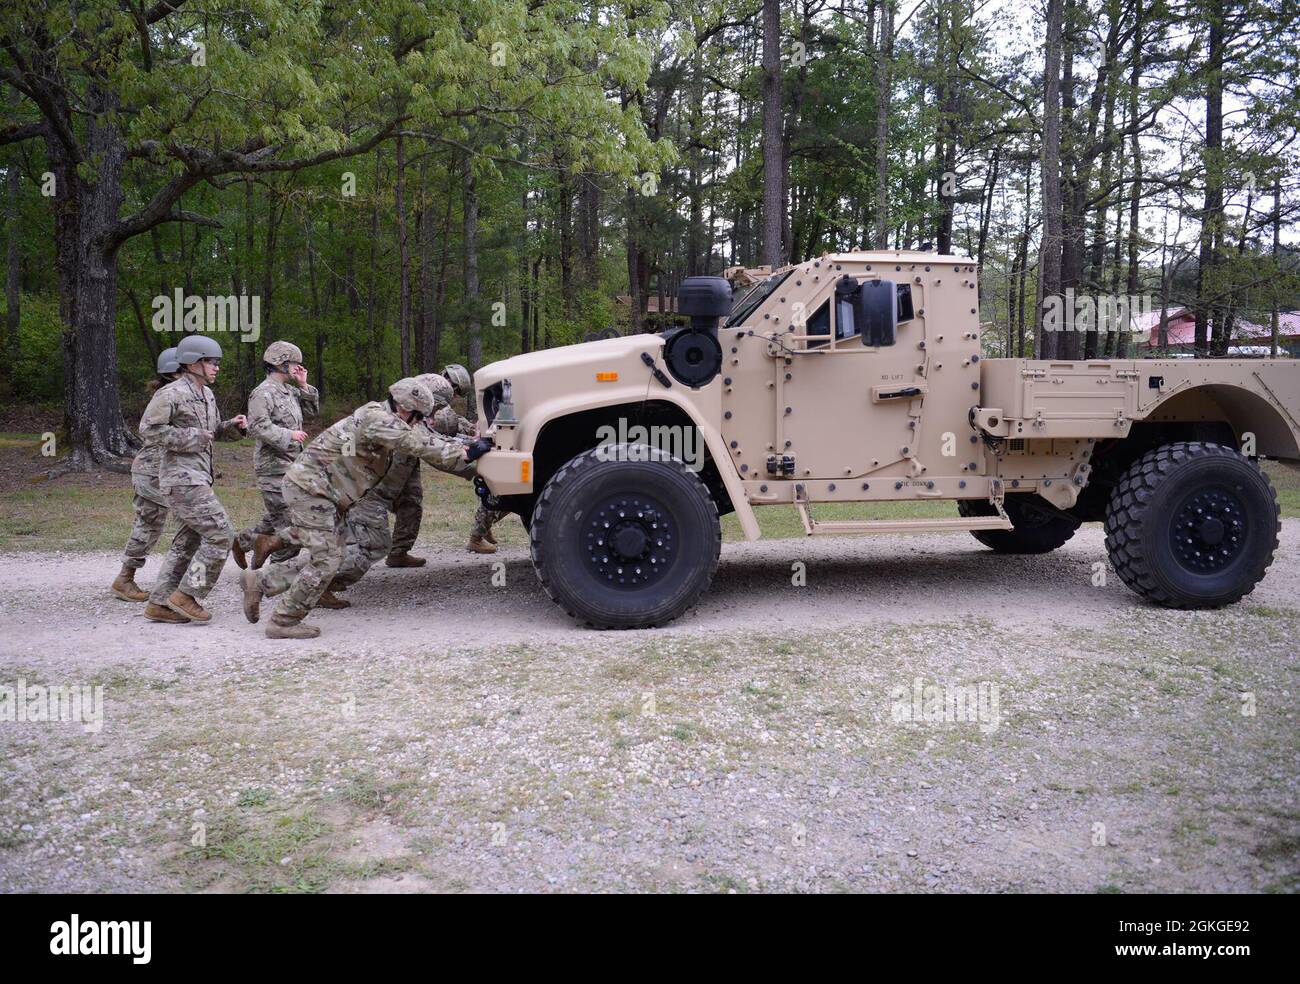 Soldiers from Support Battalion, 1st Special Warfare Training Group (Airborne) push a truck as part of a stress-shoot during the battalion's Commander's Cup competition at Fort Bragg, North Carolina April 15, 2021. The Soldiers from each company competed in a ruck march, obstacle course, land navigation, Jeopardy-themed trivia contest and stress shoot with pistols and rifles. Stock Photo